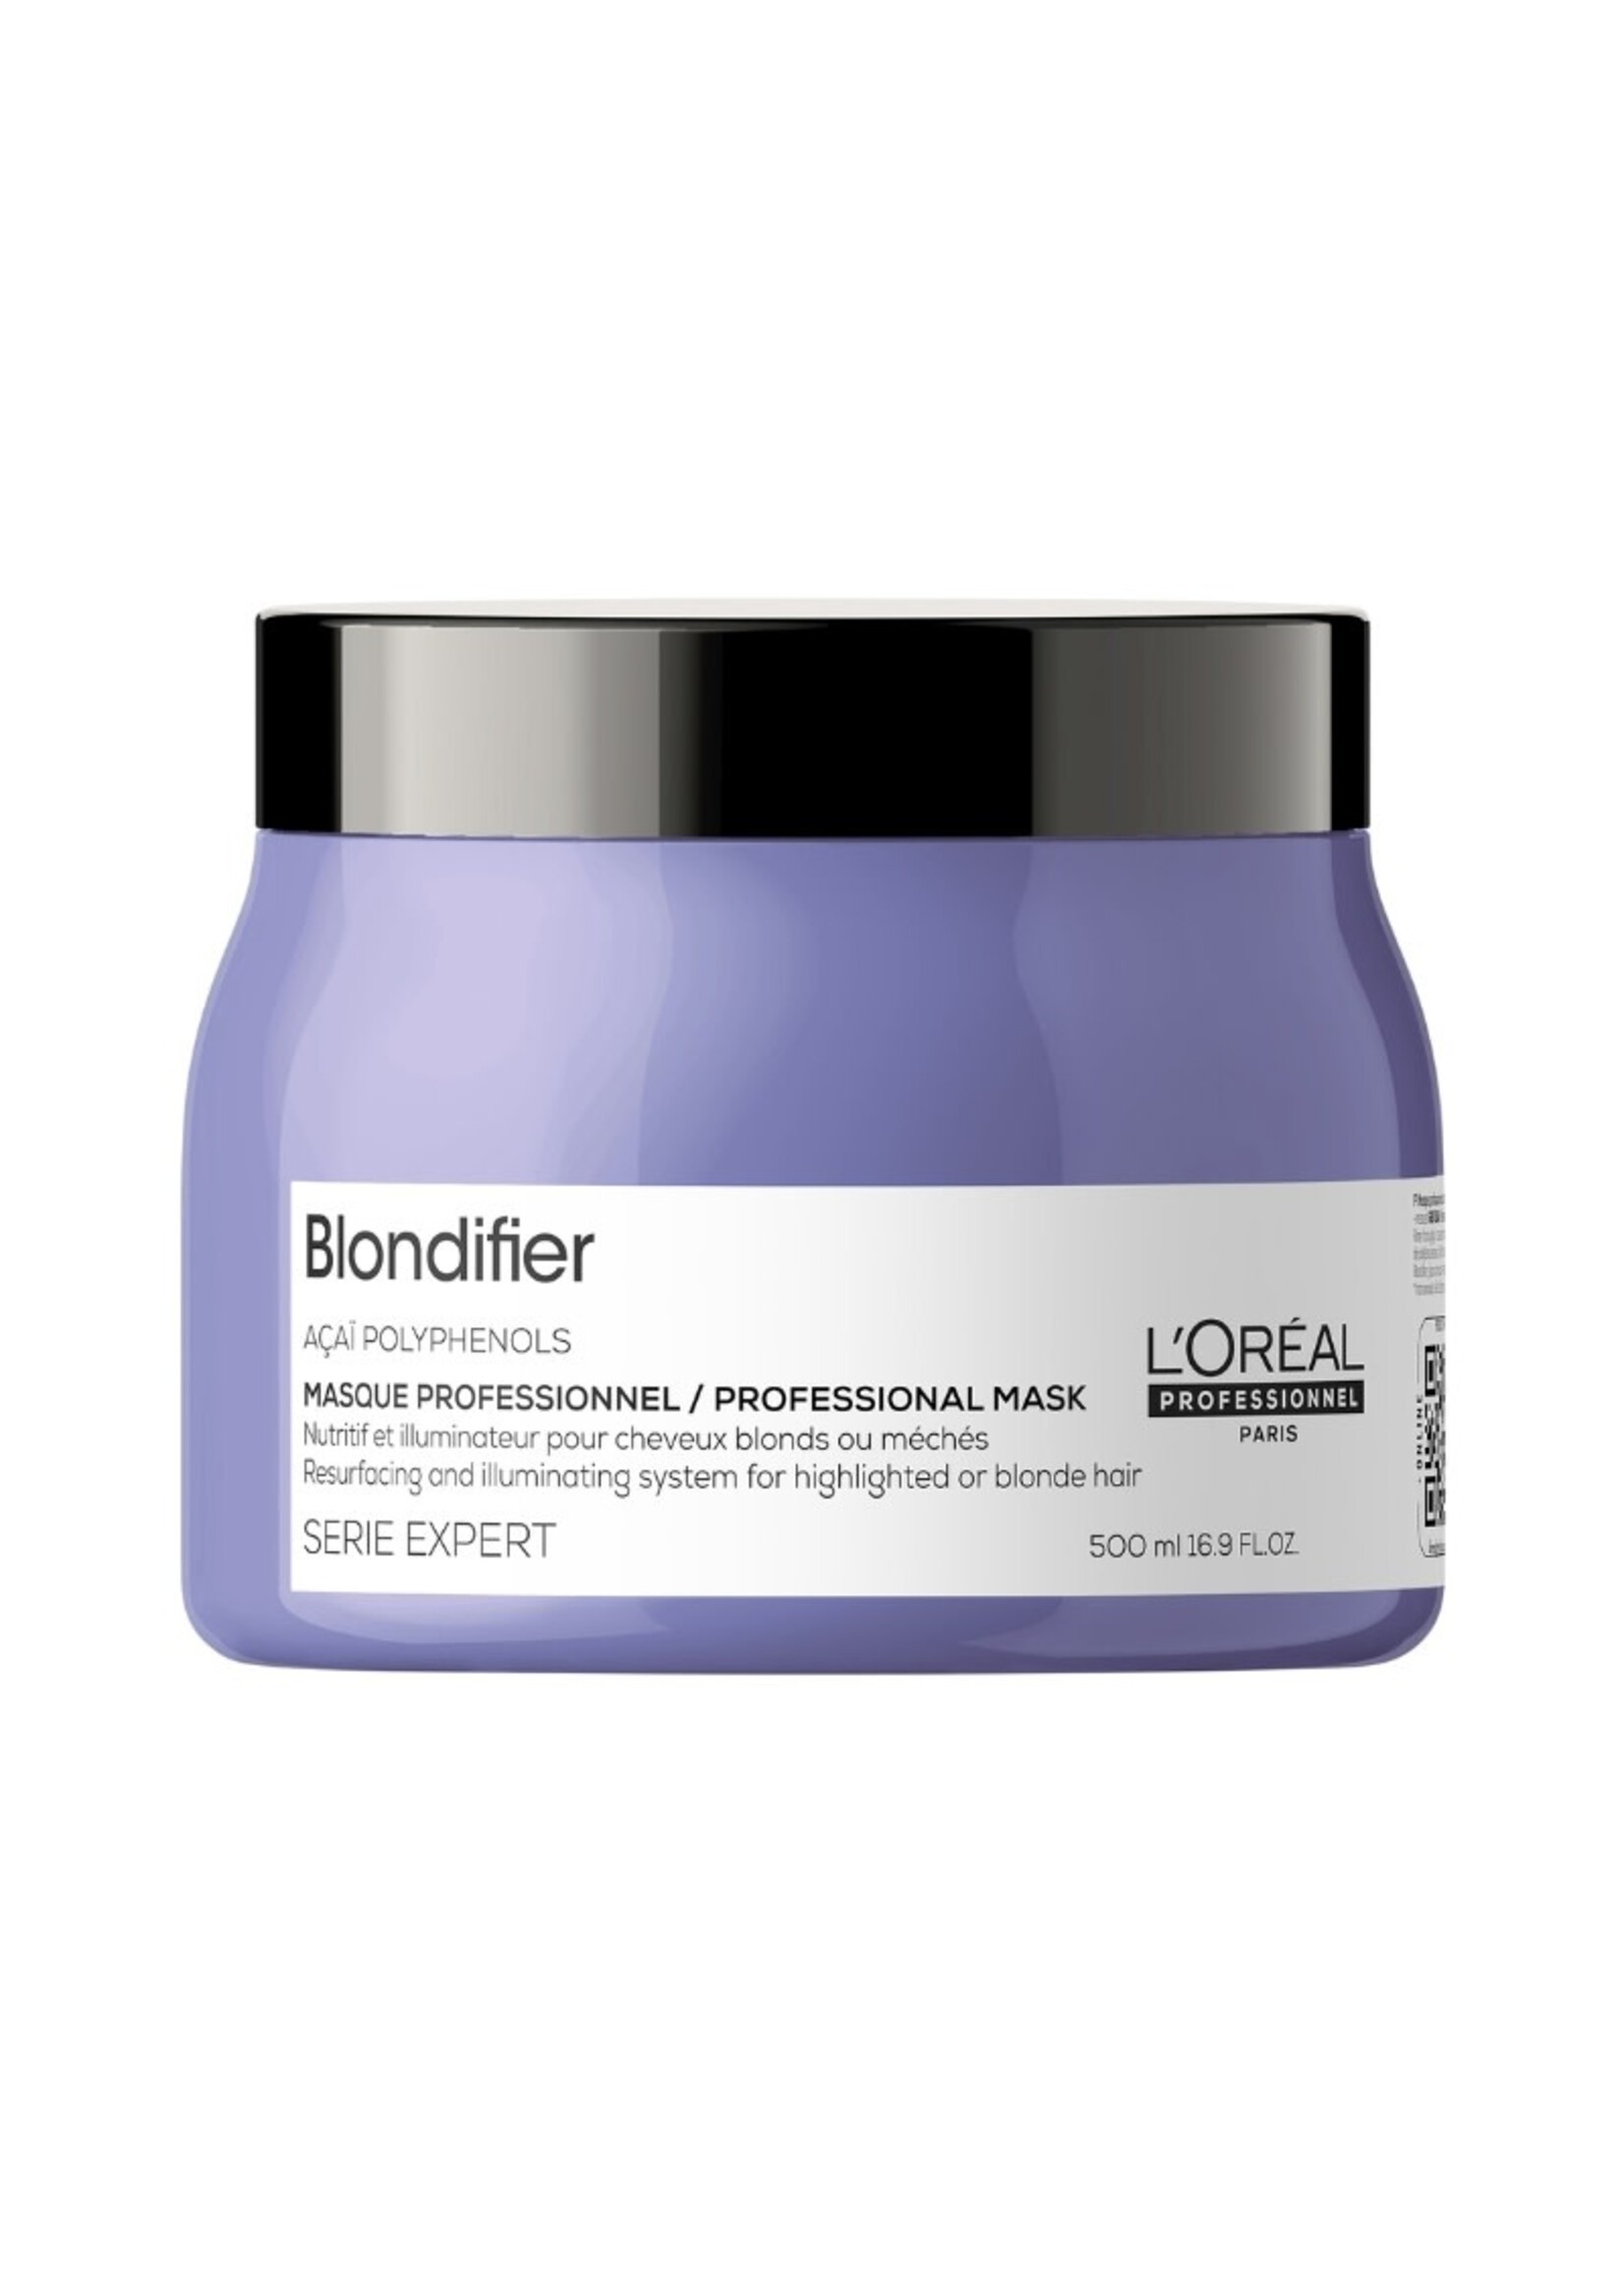 Loreal Professional Loreal Serie Expert Blondifier Mask 500mL